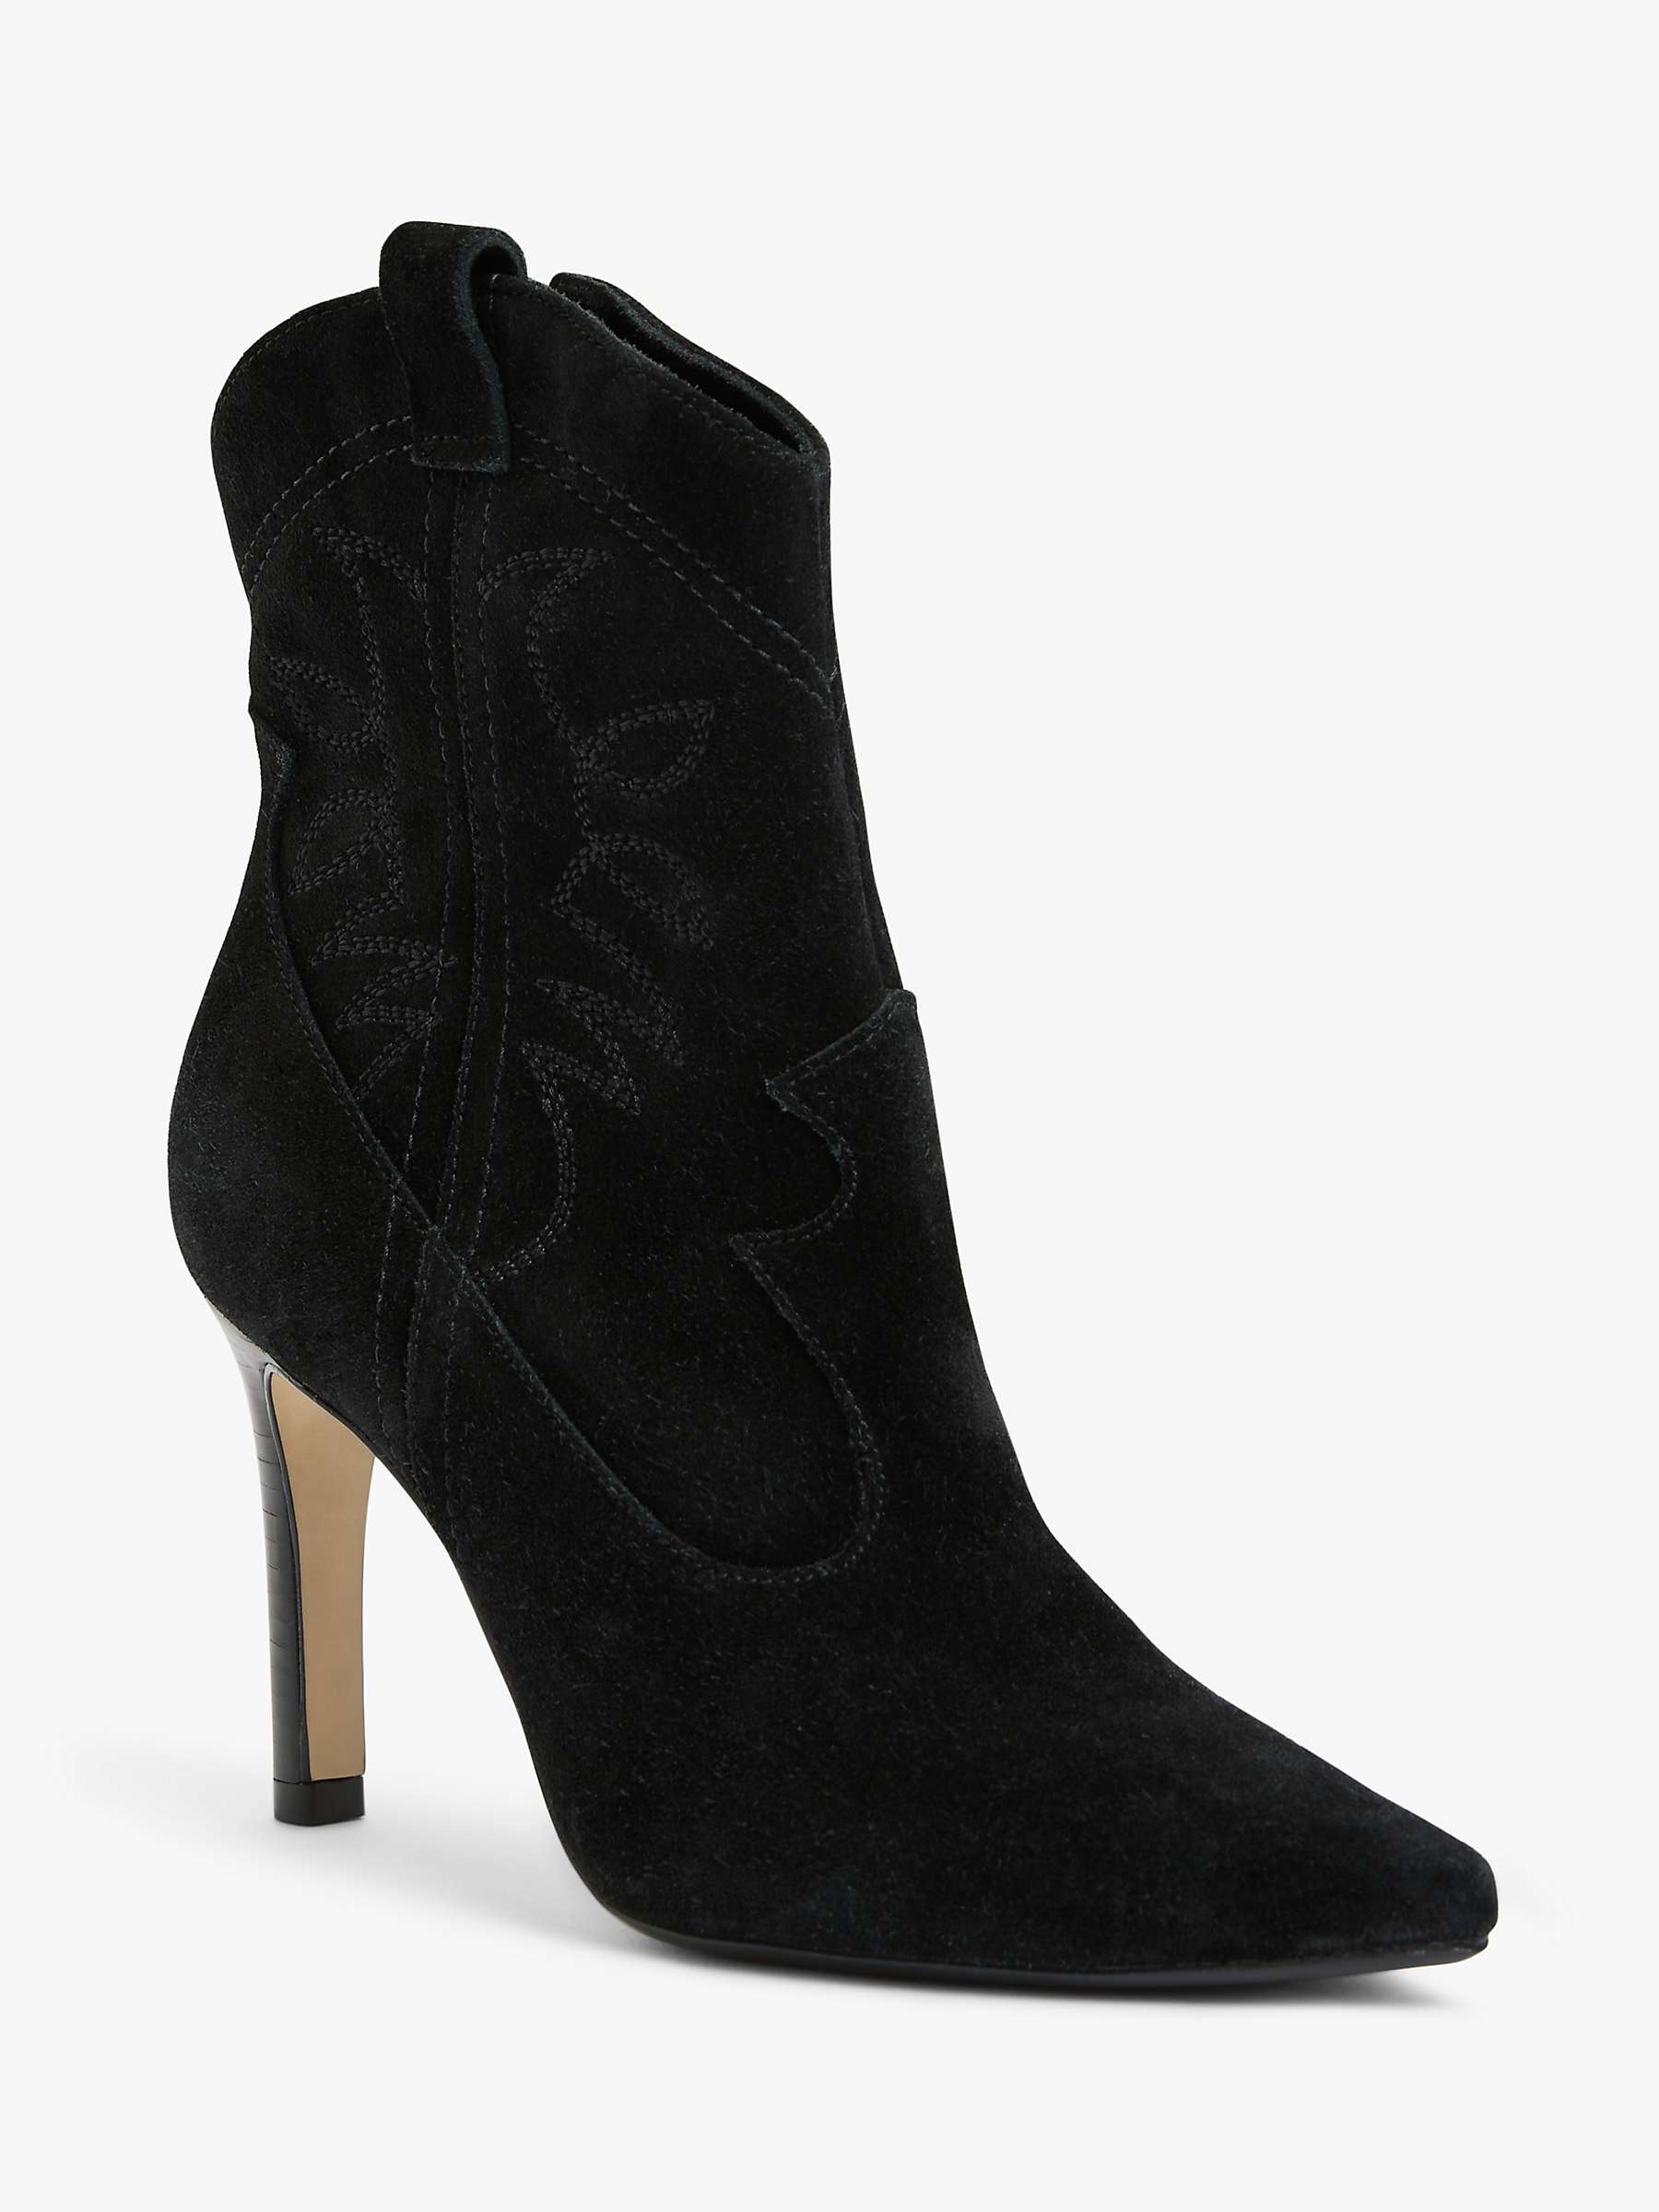 Buy AND/OR Octave Suede Stiletto Heel Ankle Boots Online at johnlewis.com